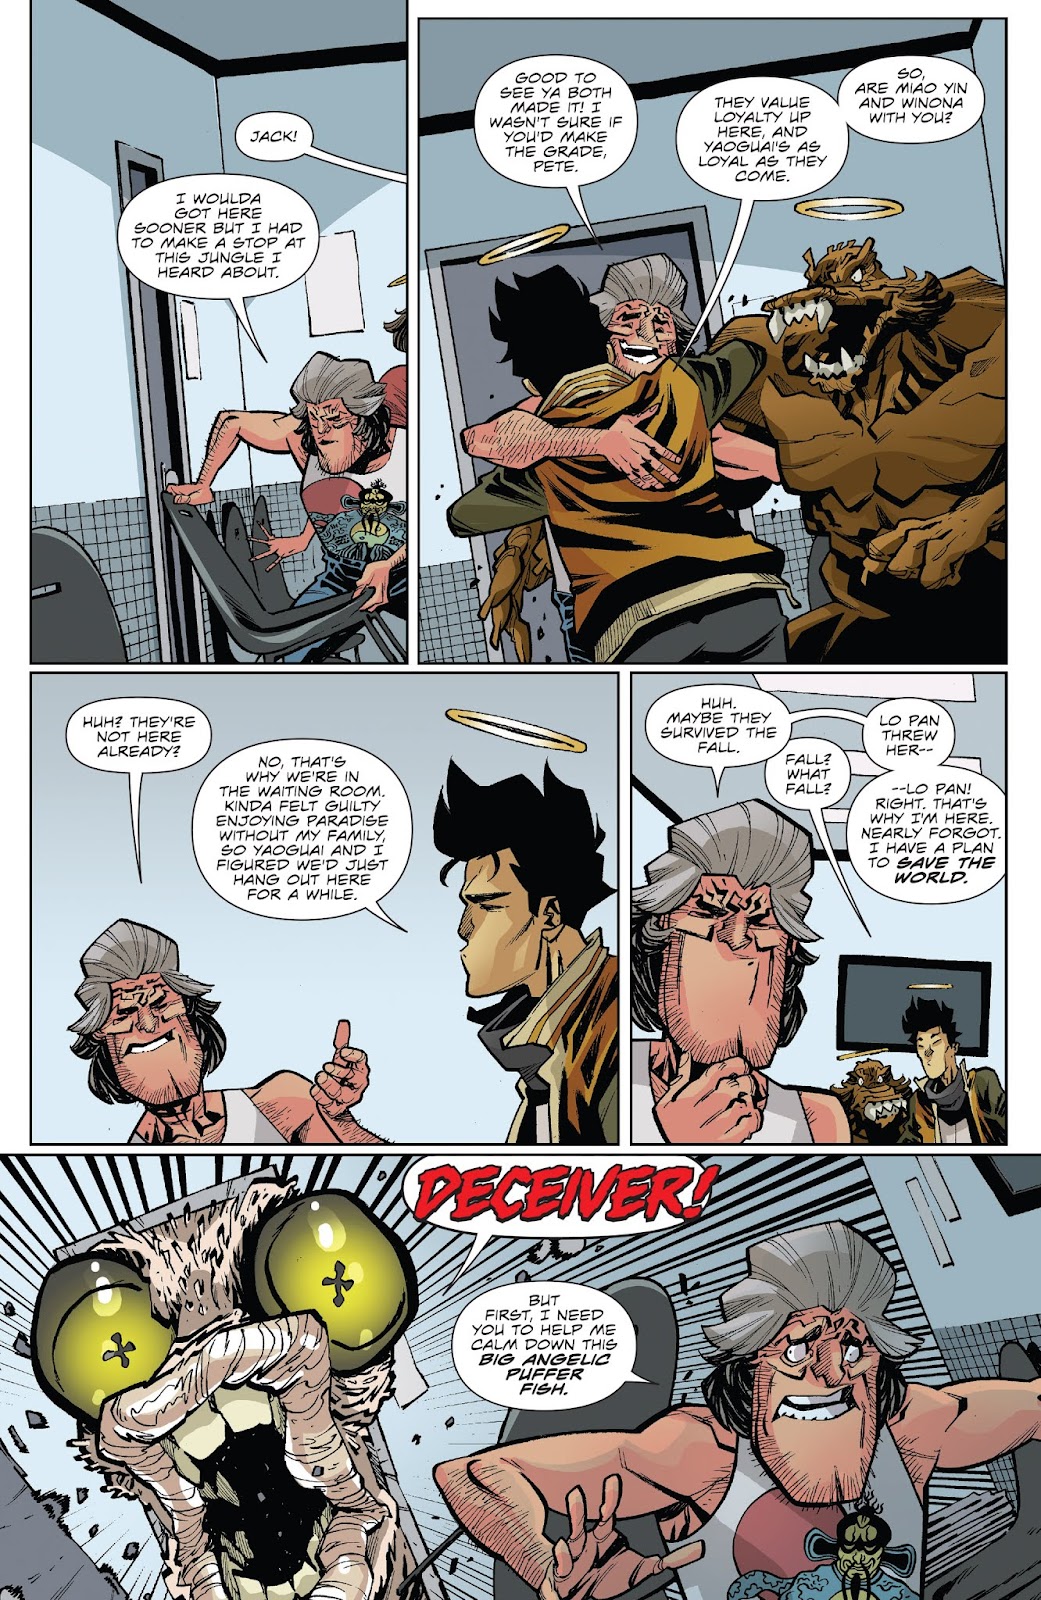 Big Trouble in Little China: Old Man Jack issue 10 - Page 21